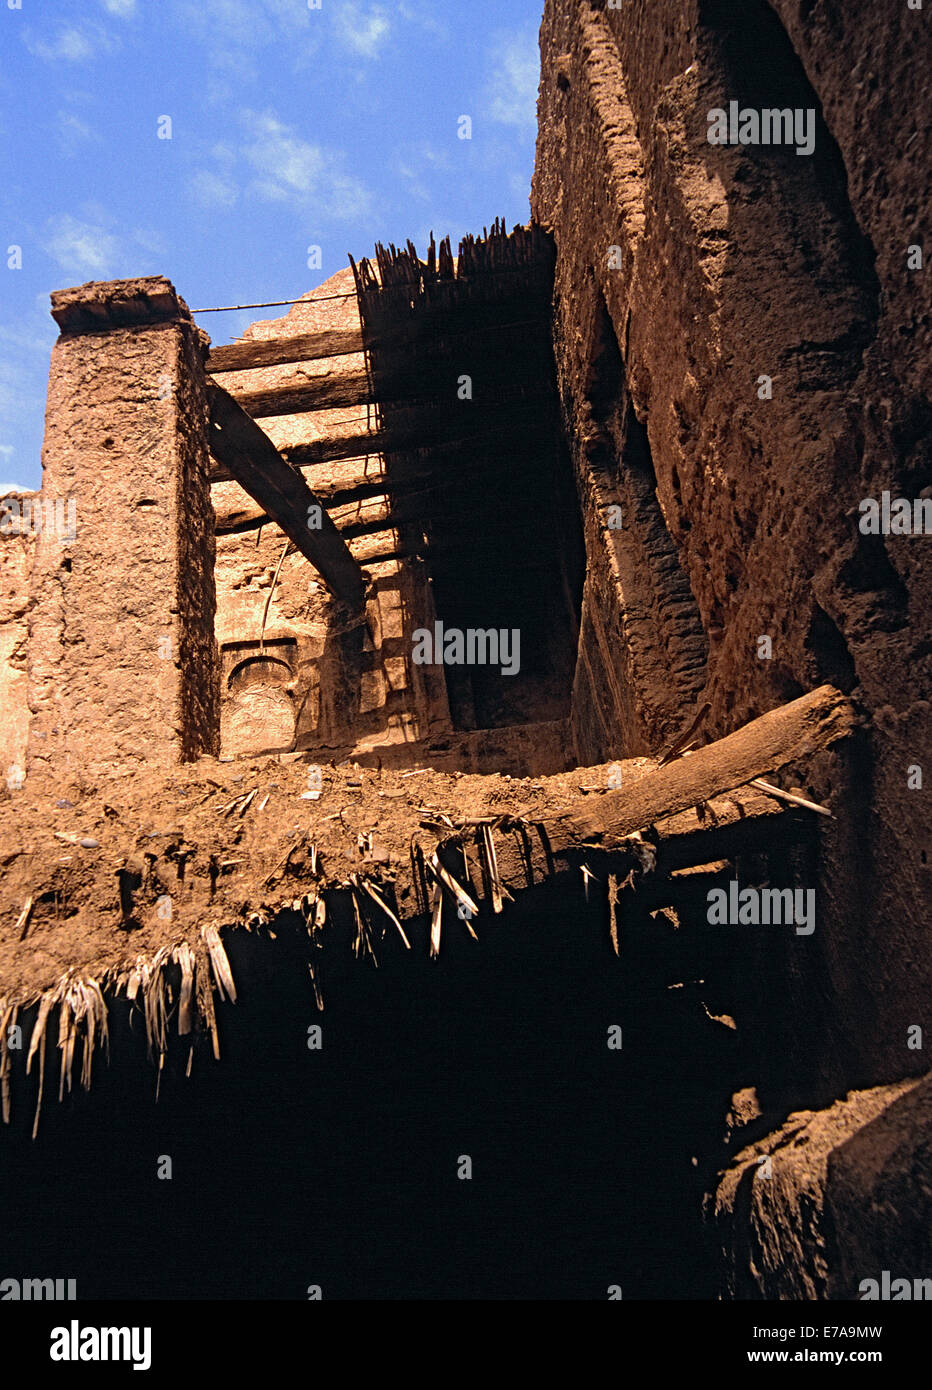 Low angle view of mud hut, Agdz, Maroc Banque D'Images